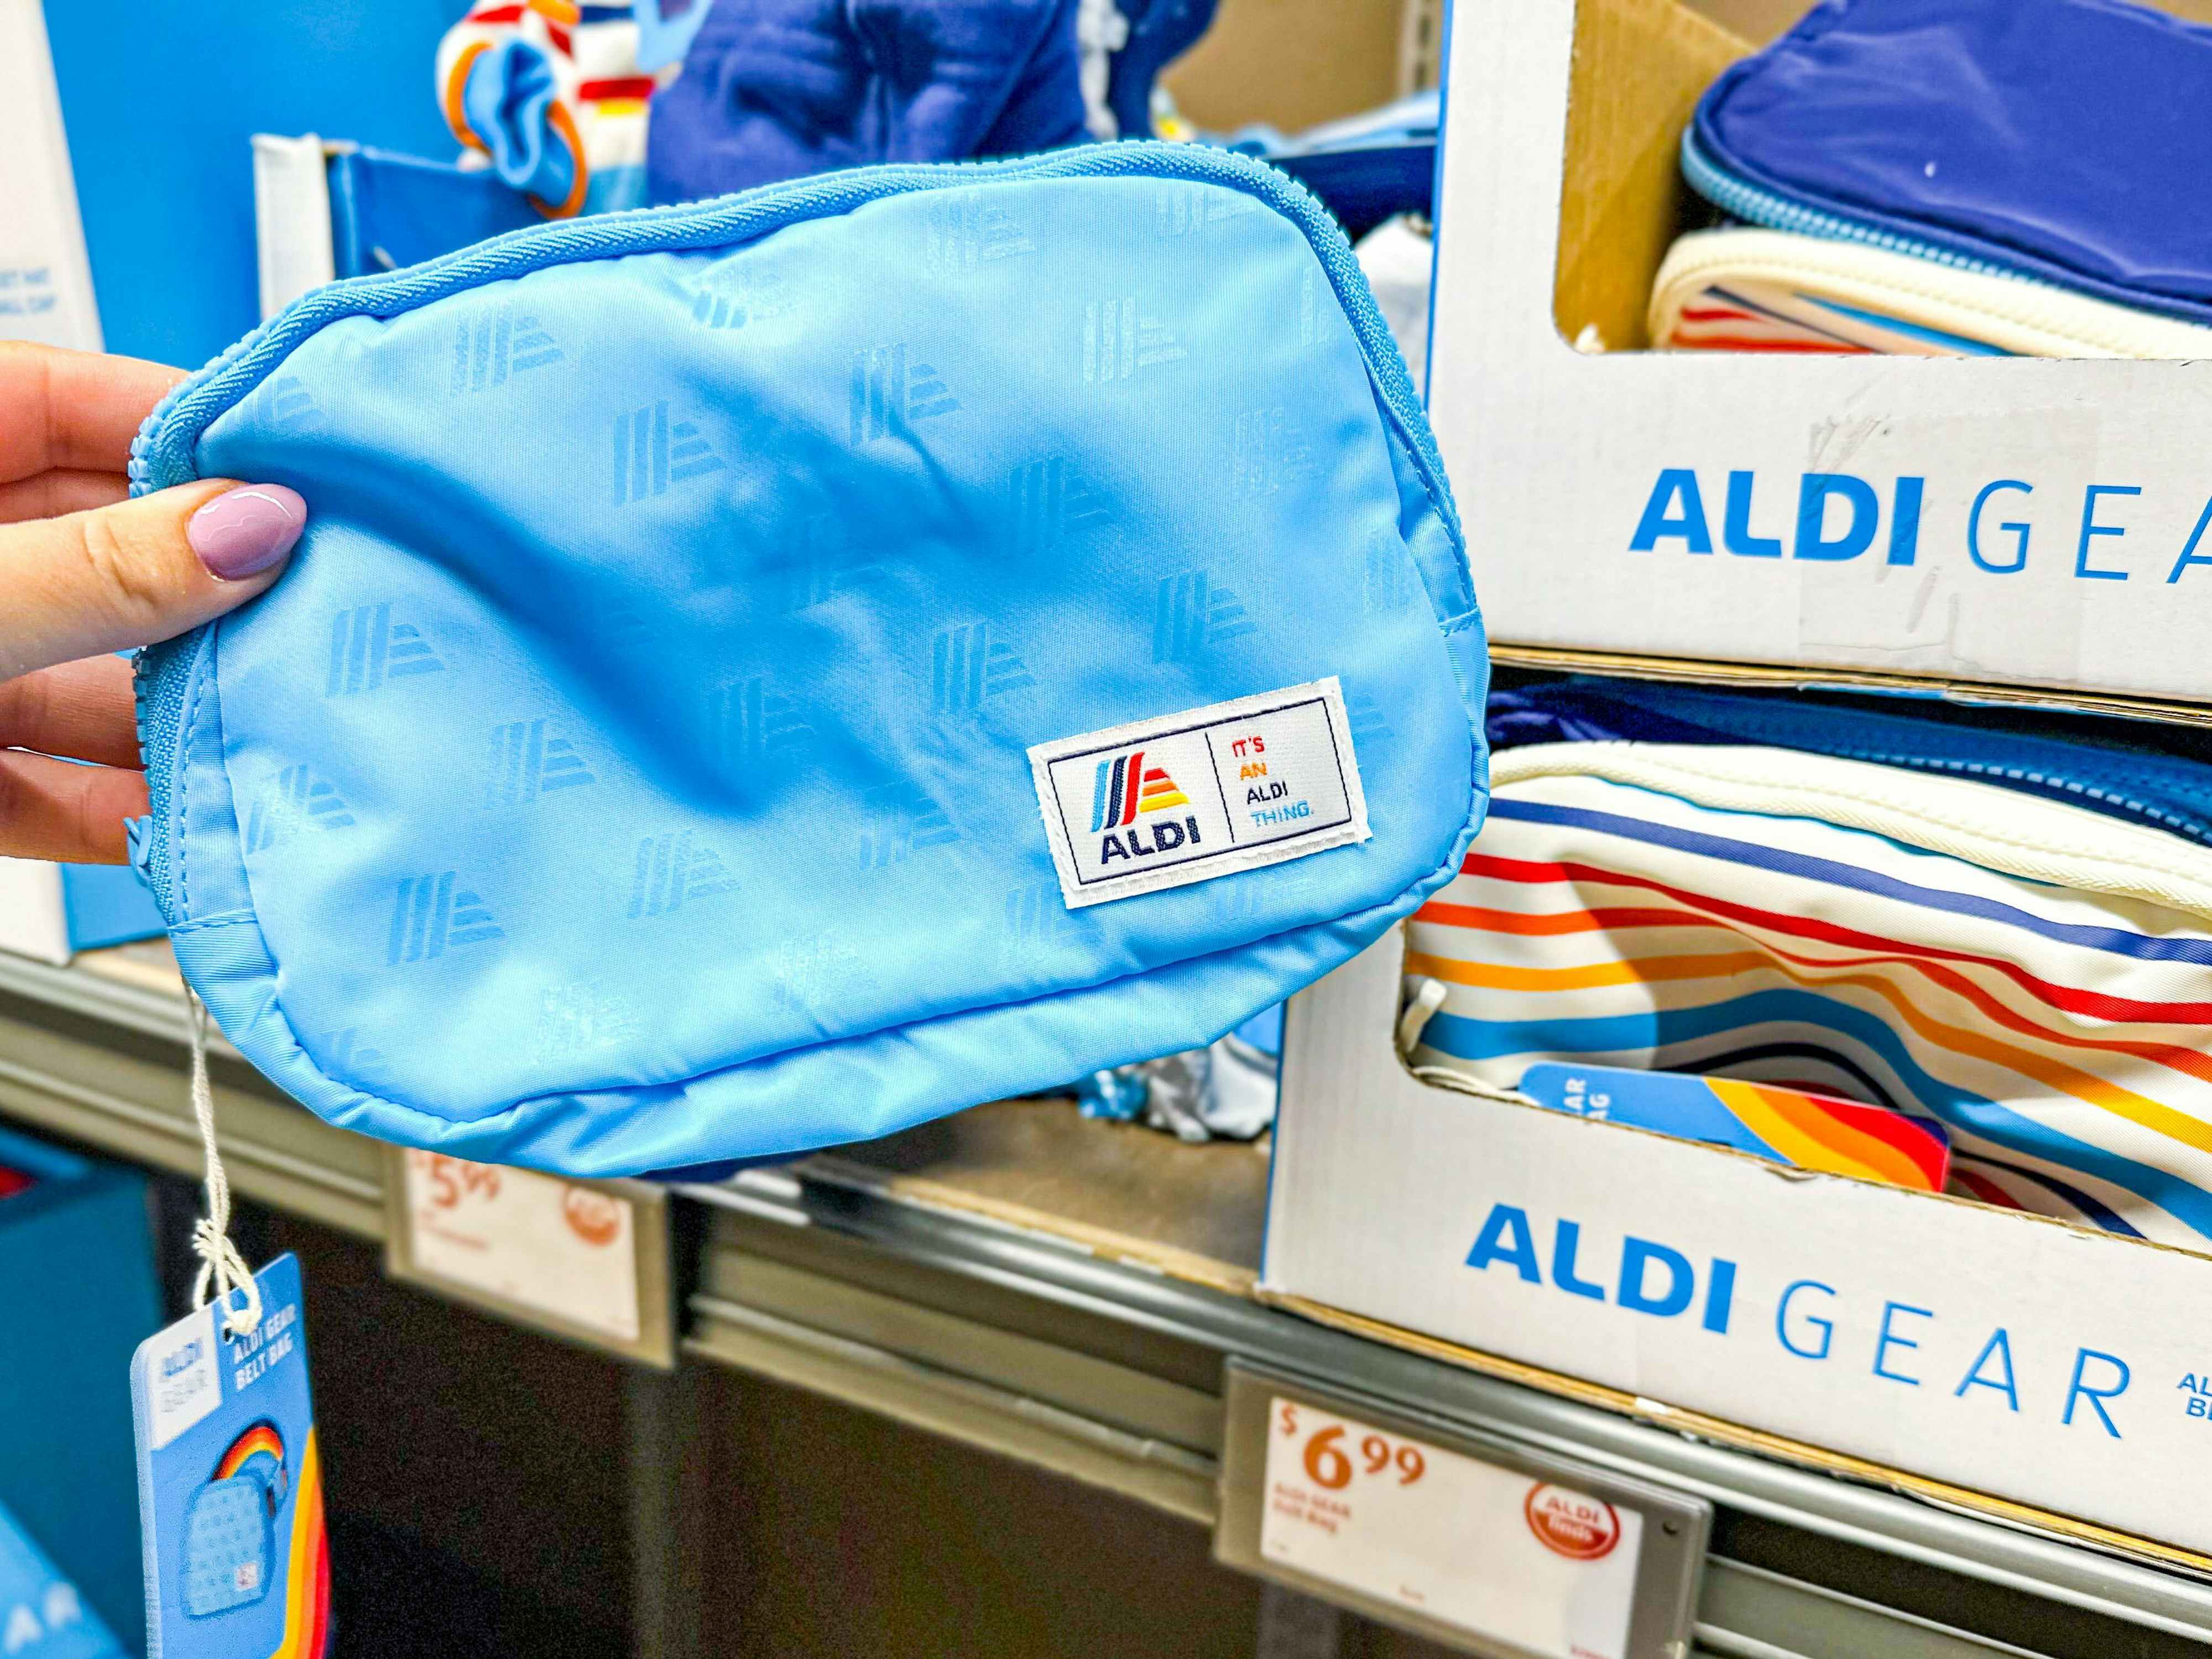 Aldi Fans Can Buy Hats, Backpacks, and Sweatshirts With the